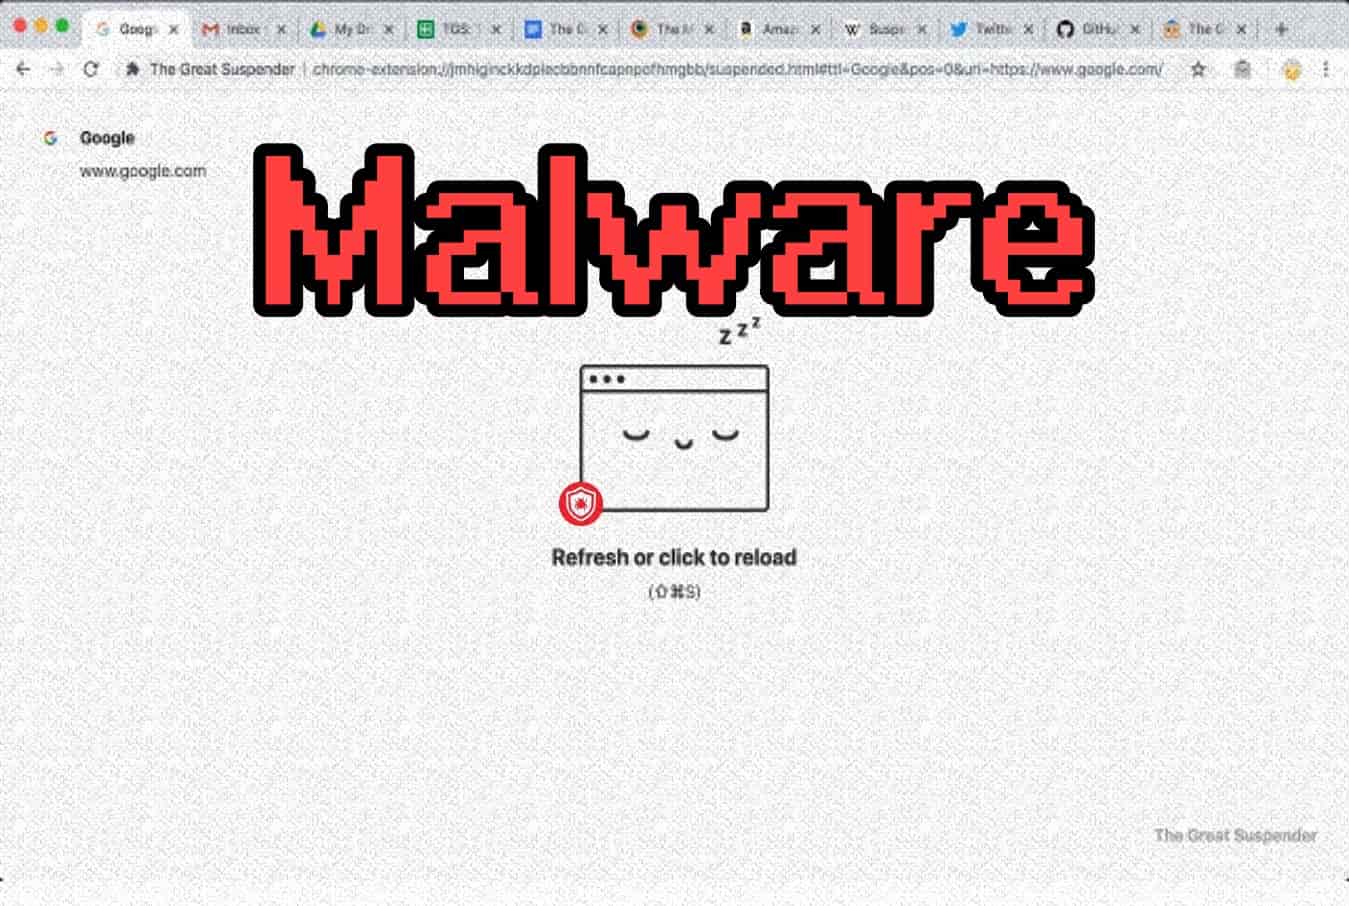 Malware found in The Great Suspender Chrome extension